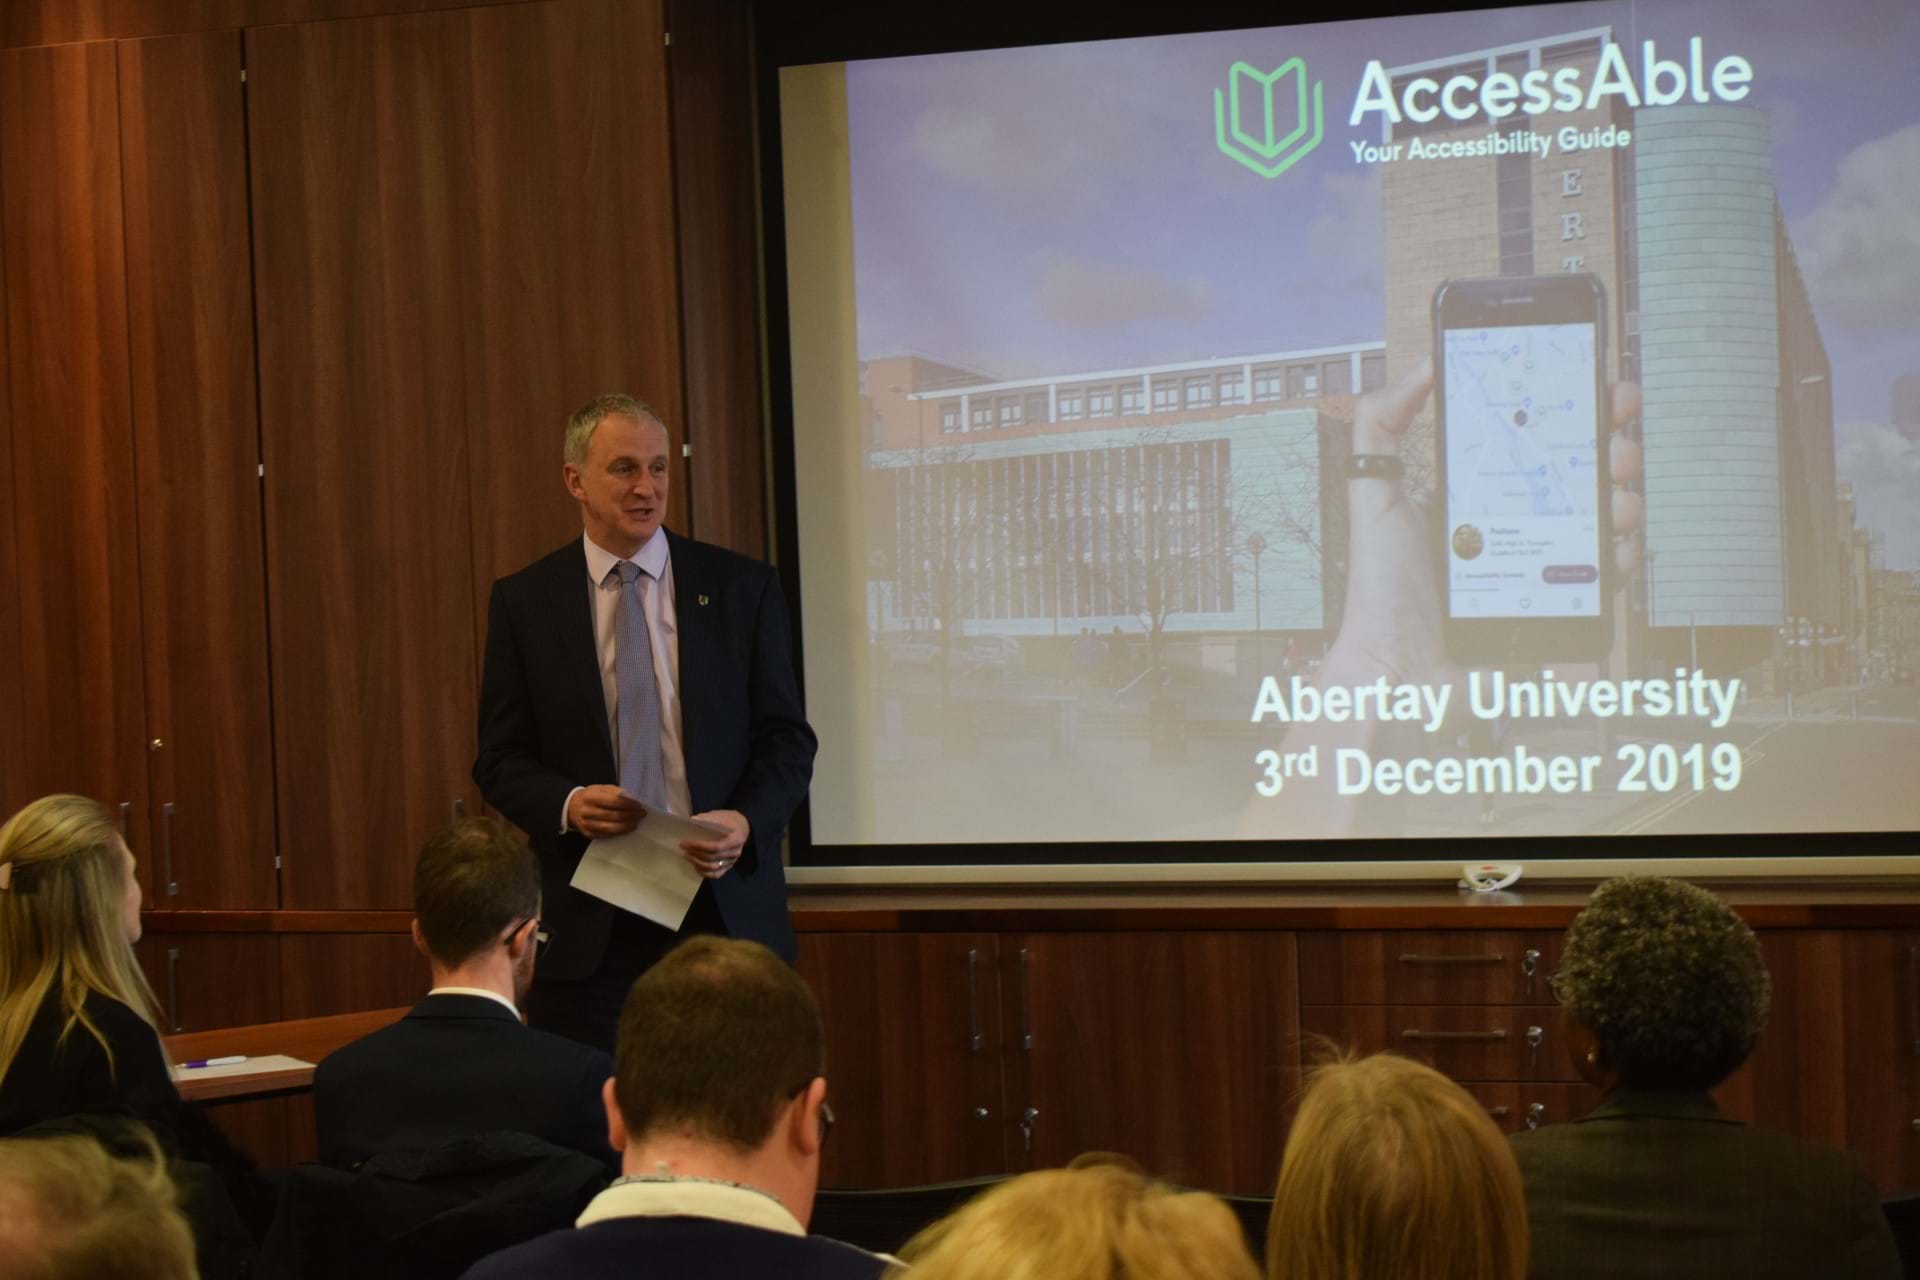 Nigel Seaton launches the AccessAble guide to Abertay